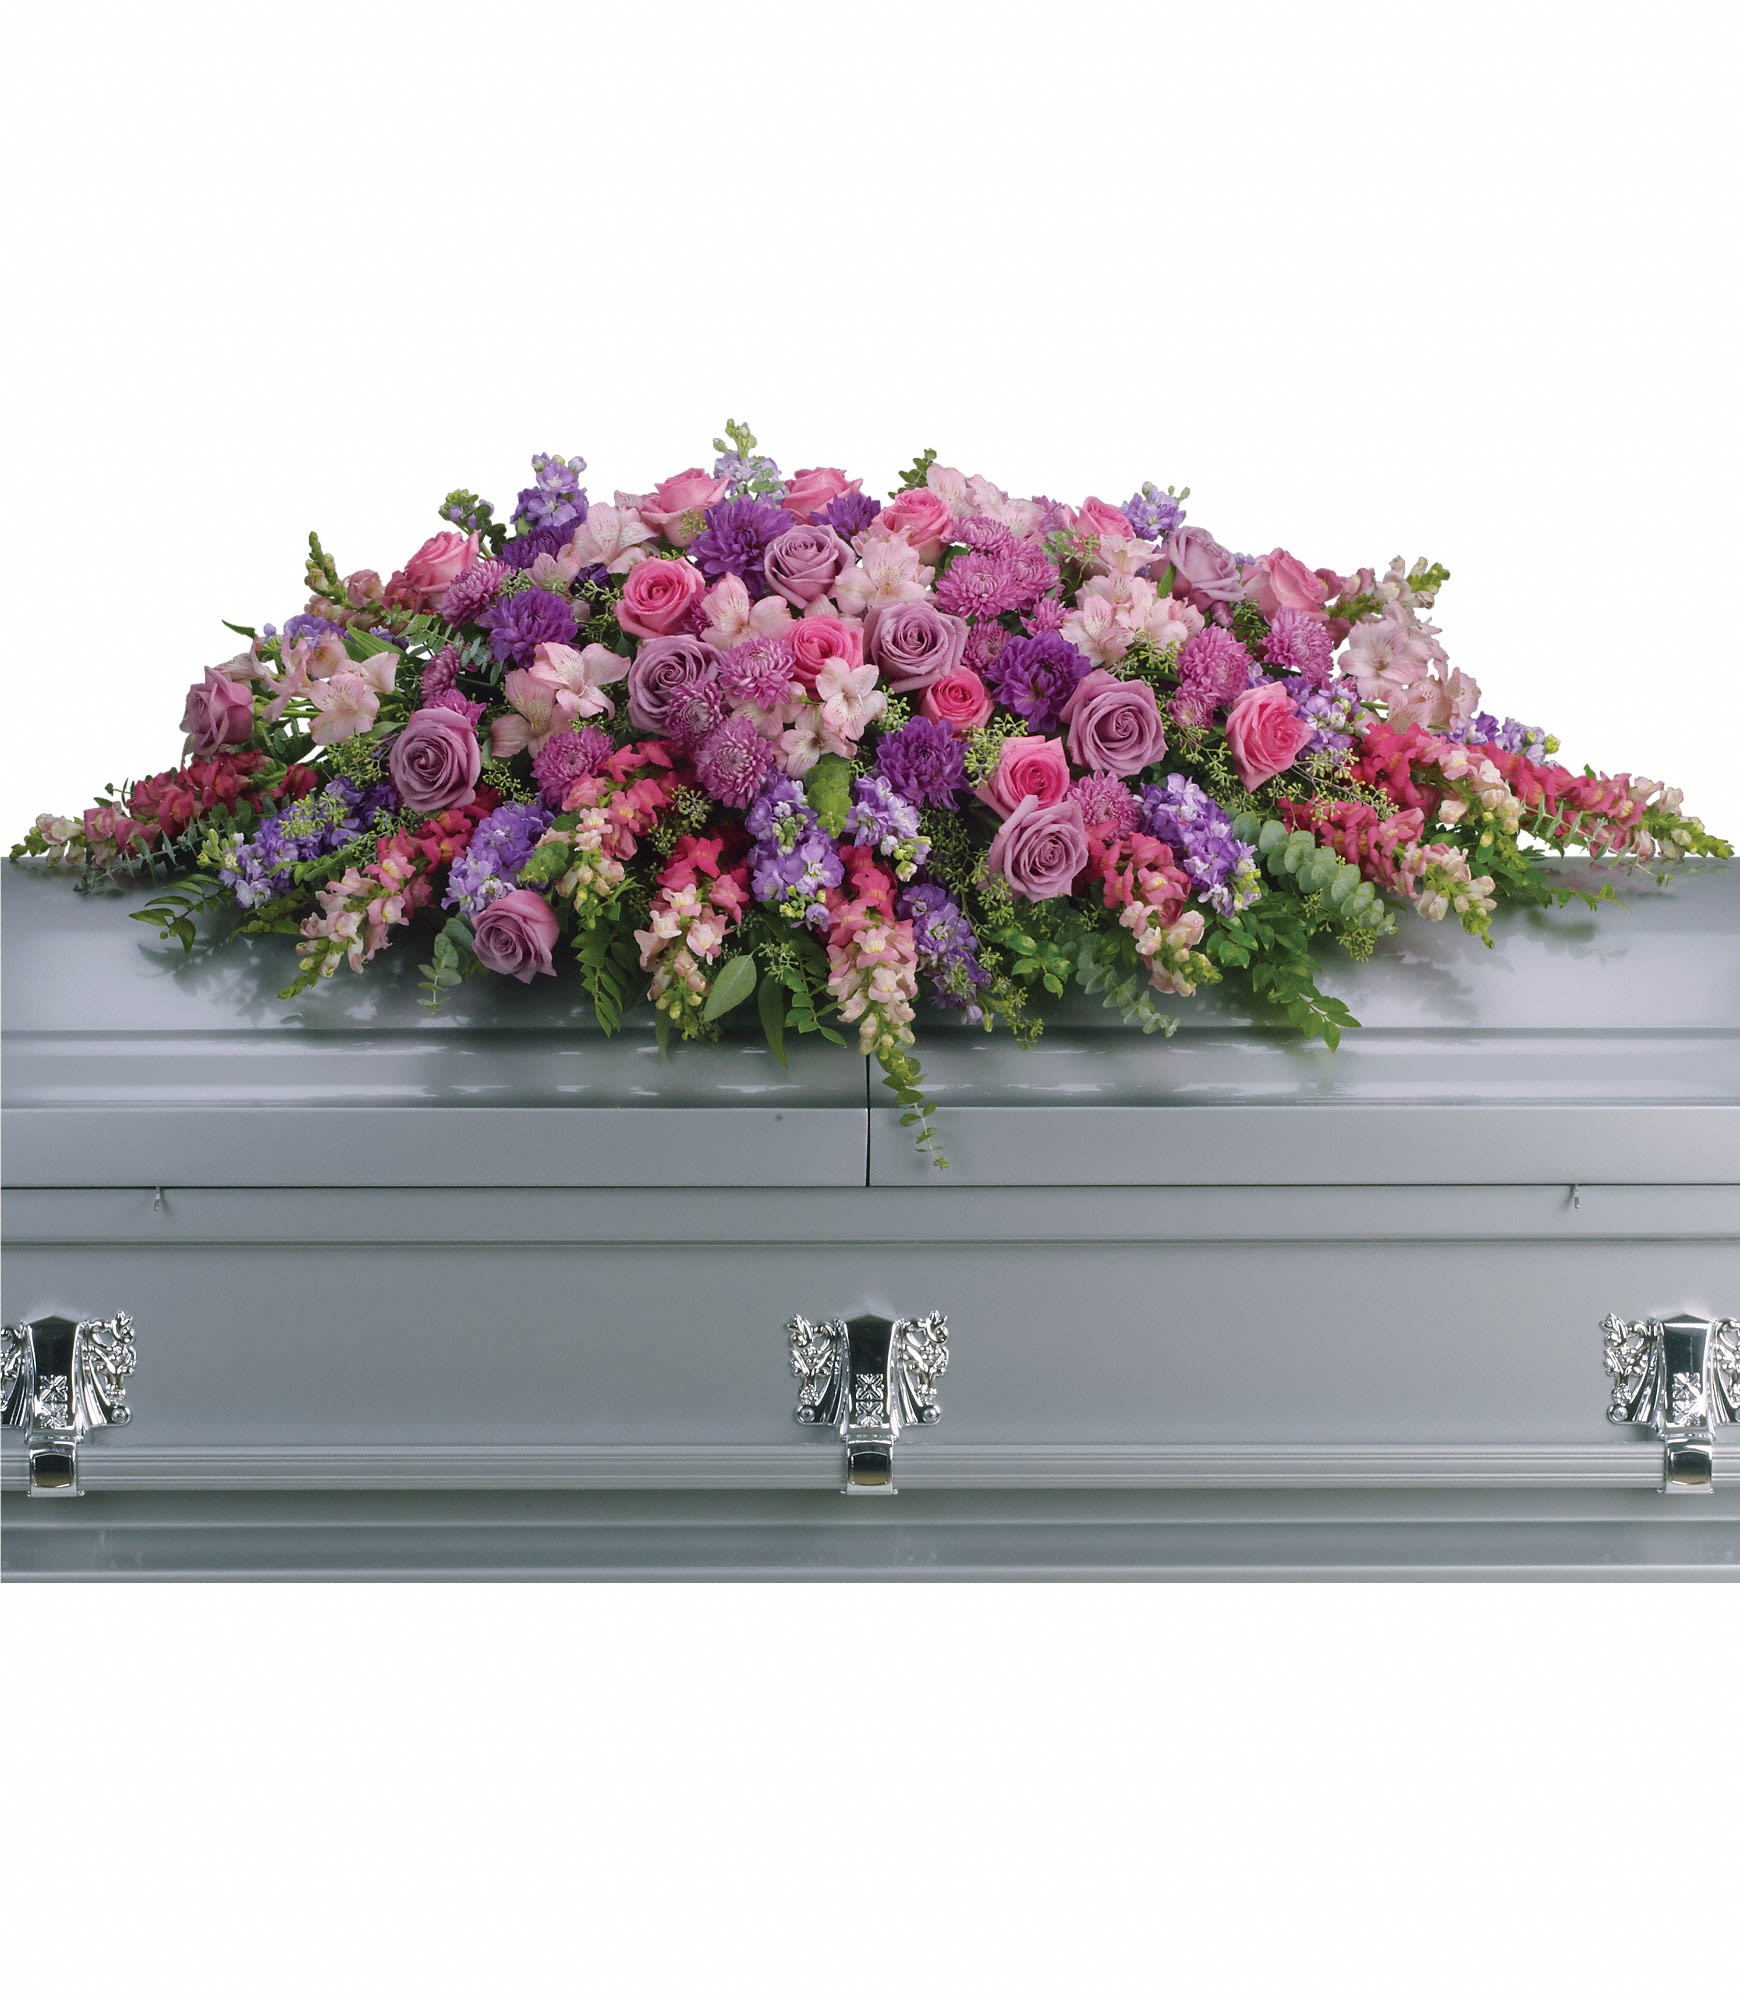 Lavender Tribute Casket Spray by Teleflora - Like a heartfelt embrace, this beautiful casket spray delivers comfort and love in an extraordinary way. A wonderful array of lavender and pink flowers with just the right amount of greenery is a lovely way to pay tribute to someone who will always be with you in heart, mind and spirit.  